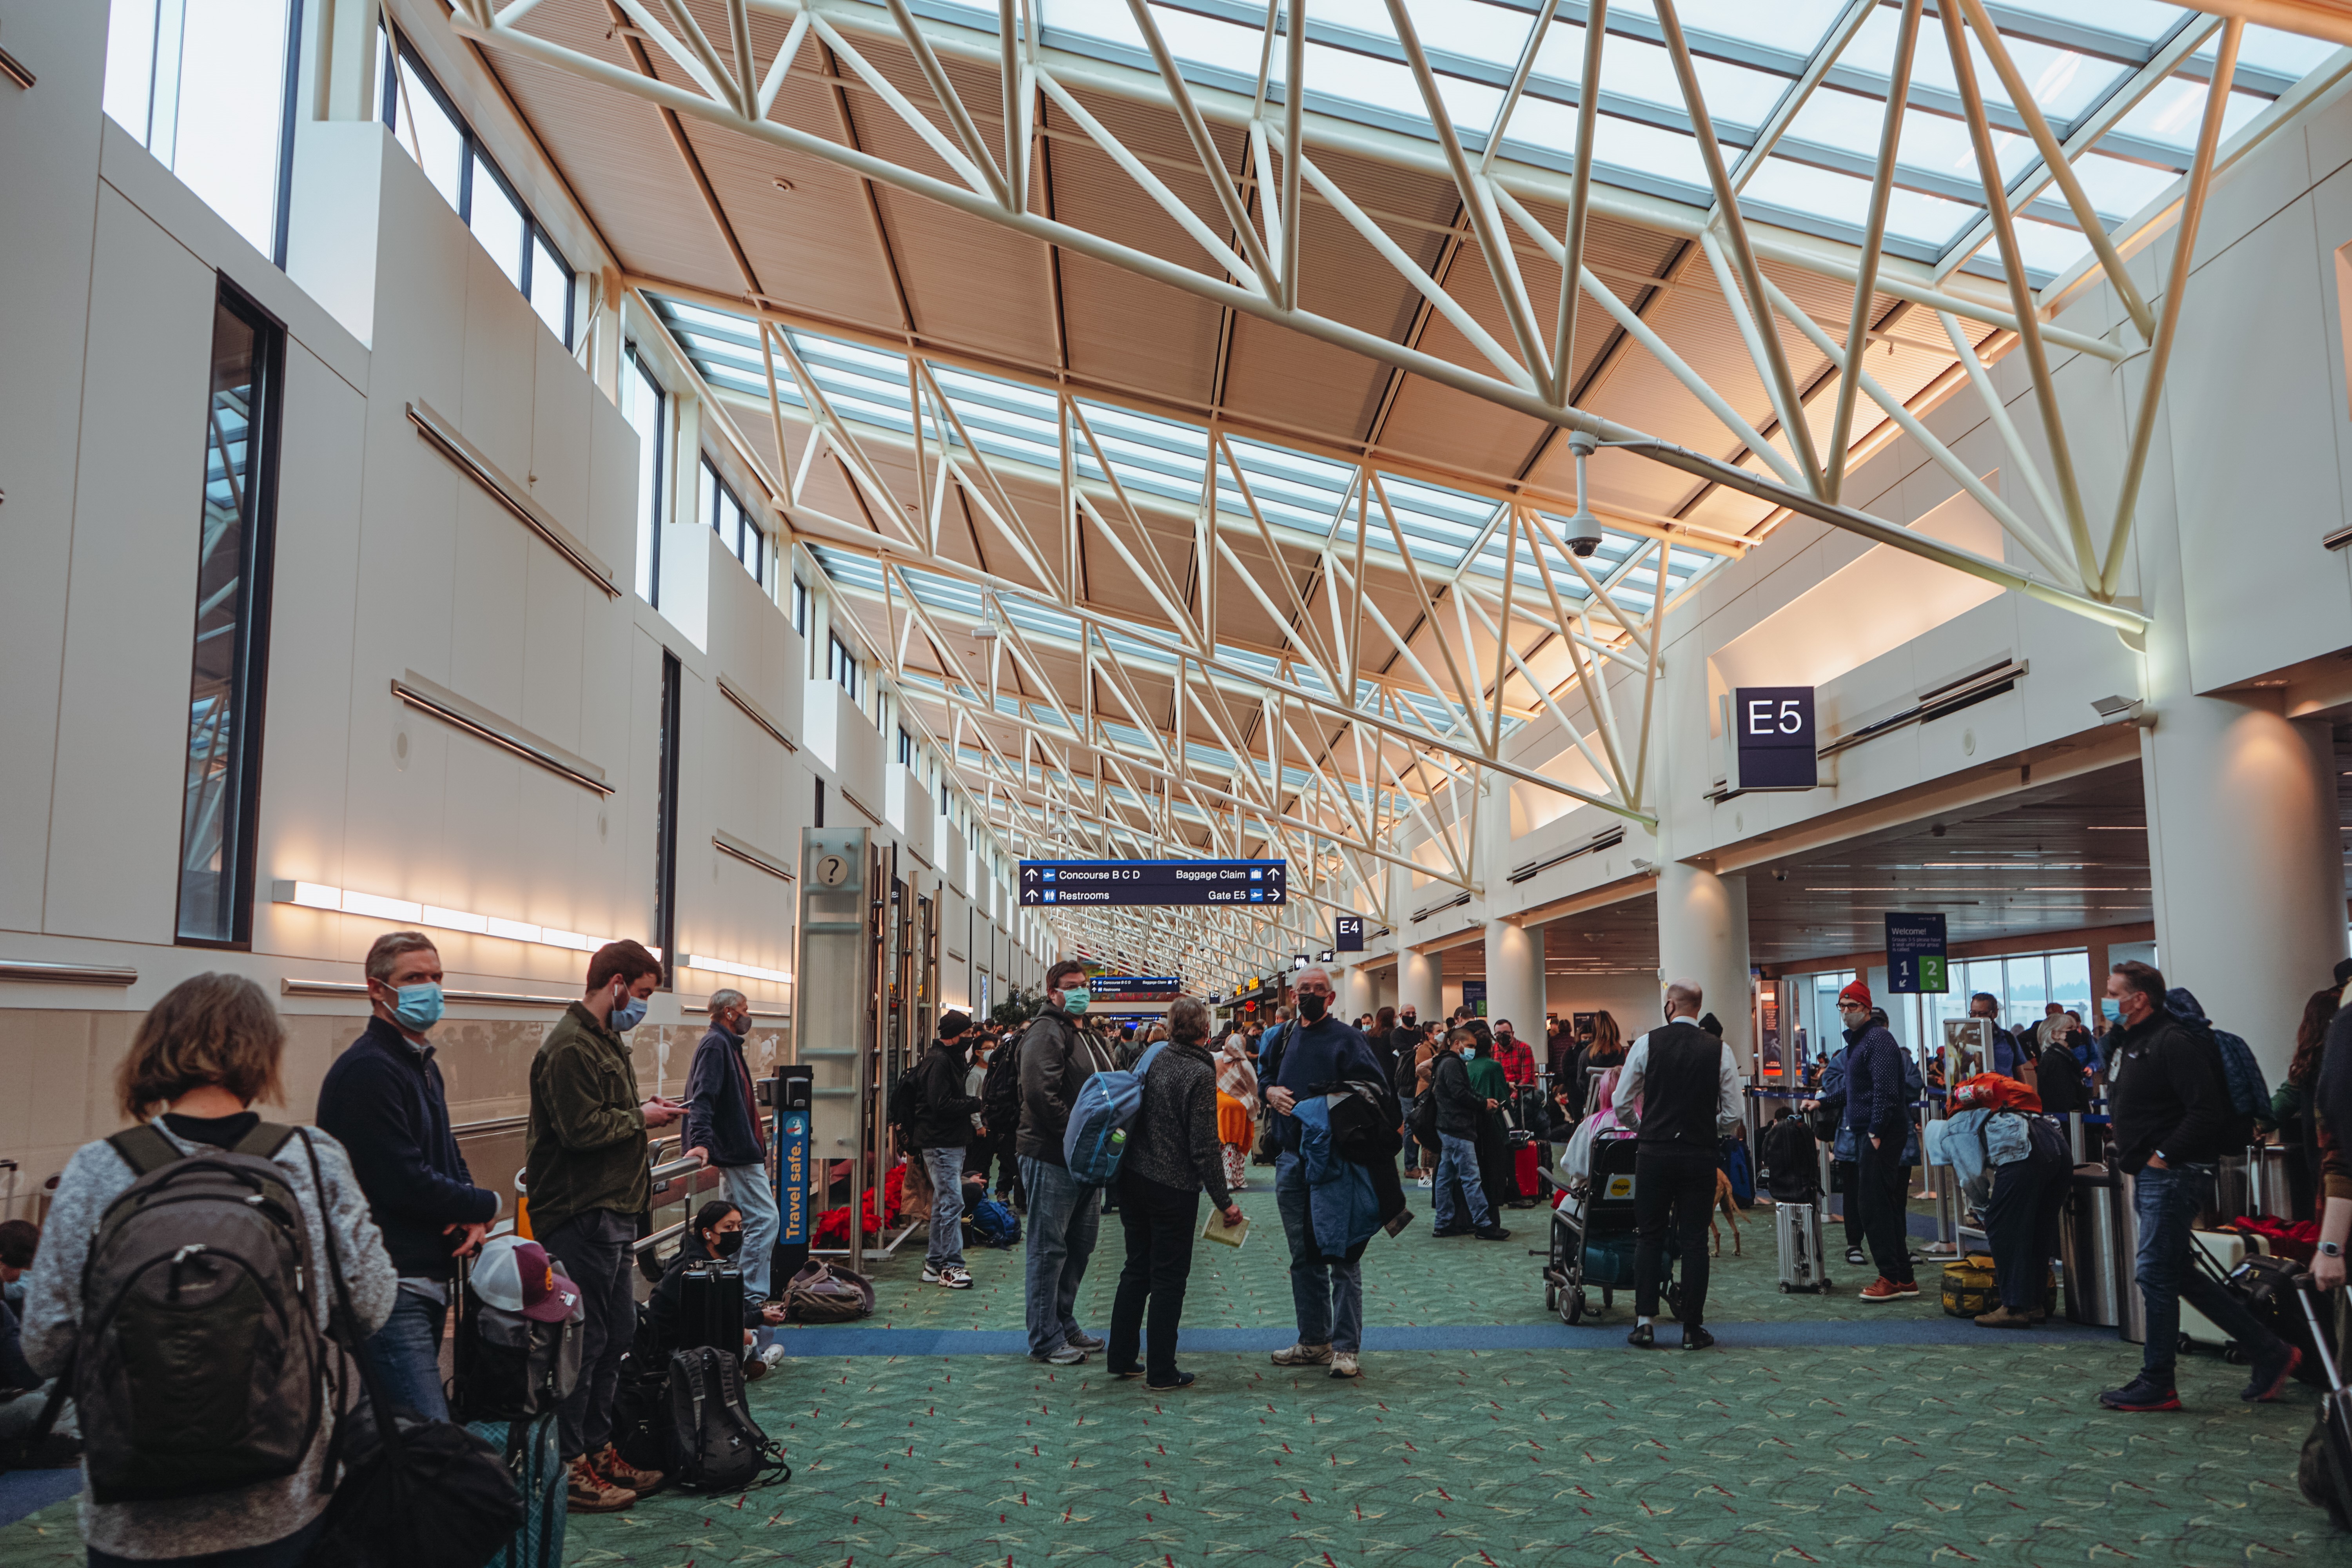 December Holiday Travel Happening Now at PDX 